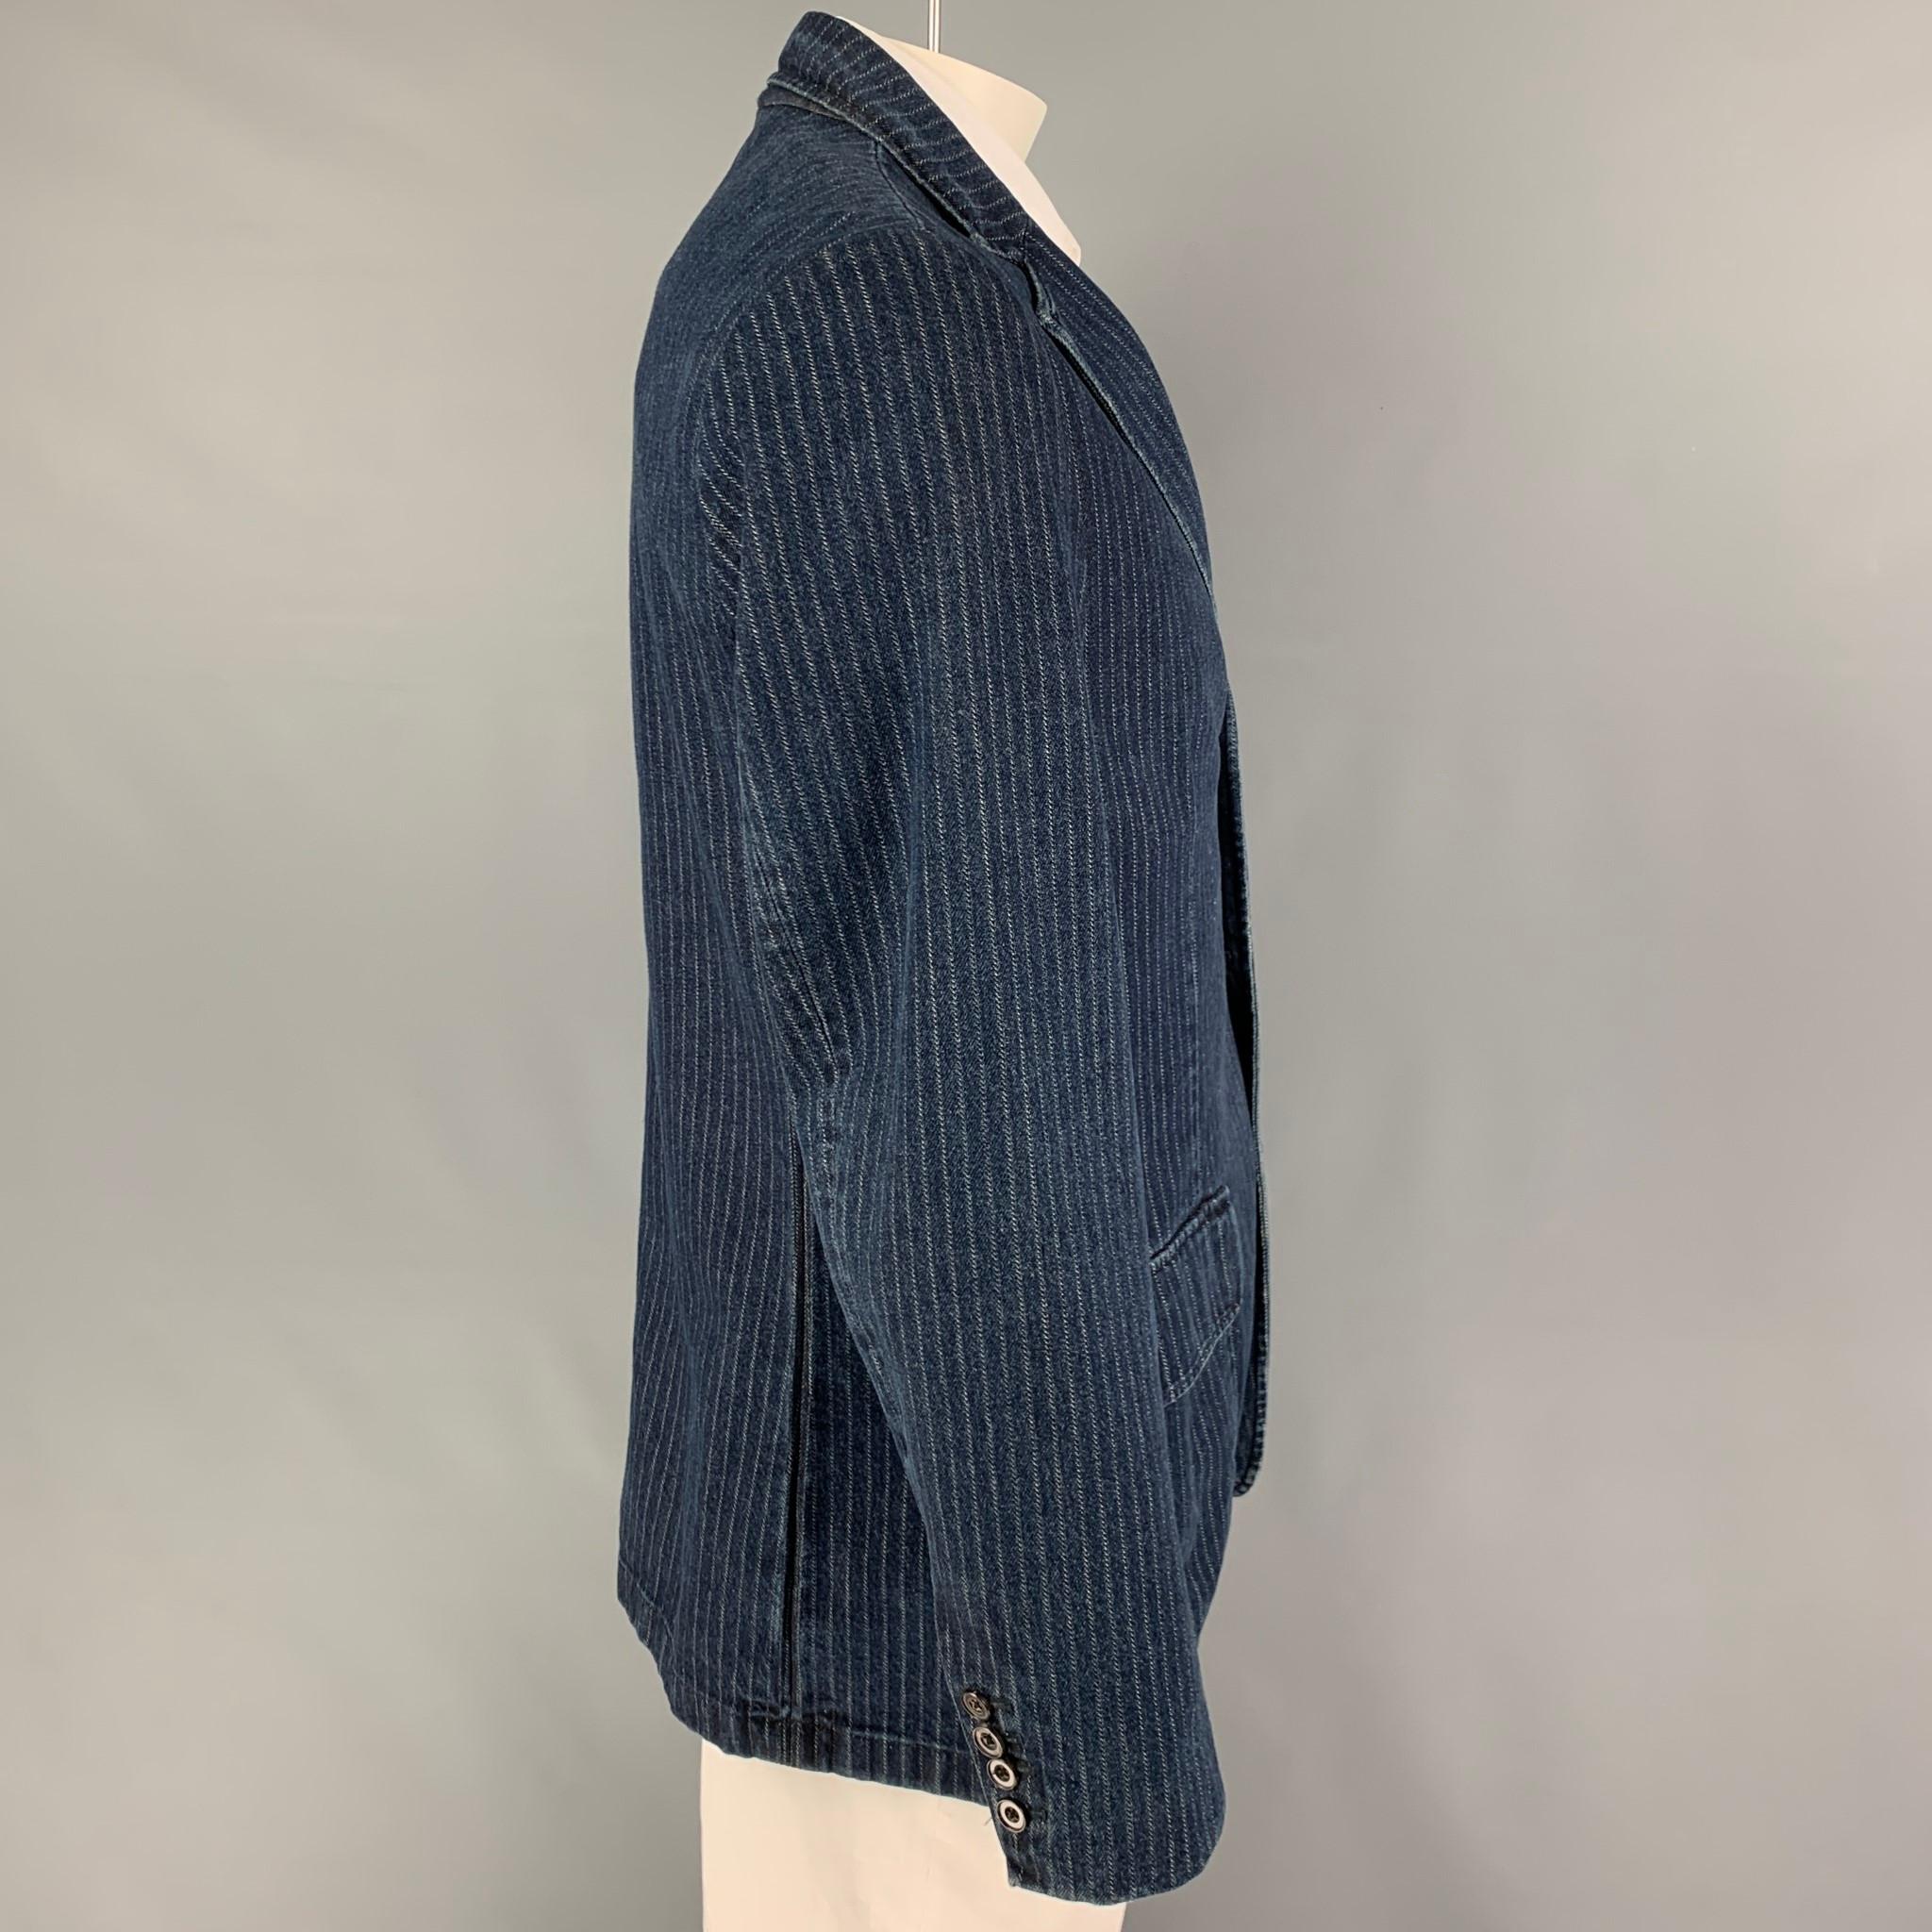 POLO by RALPH LAUREN sport coat comes in a indigo pinstripe cotton with a half liner featuring a a notch lapel, flap pockets,single back vent, and a three button closure. Made in Italy.

Very Good Pre-Owned Condition.
Marked: